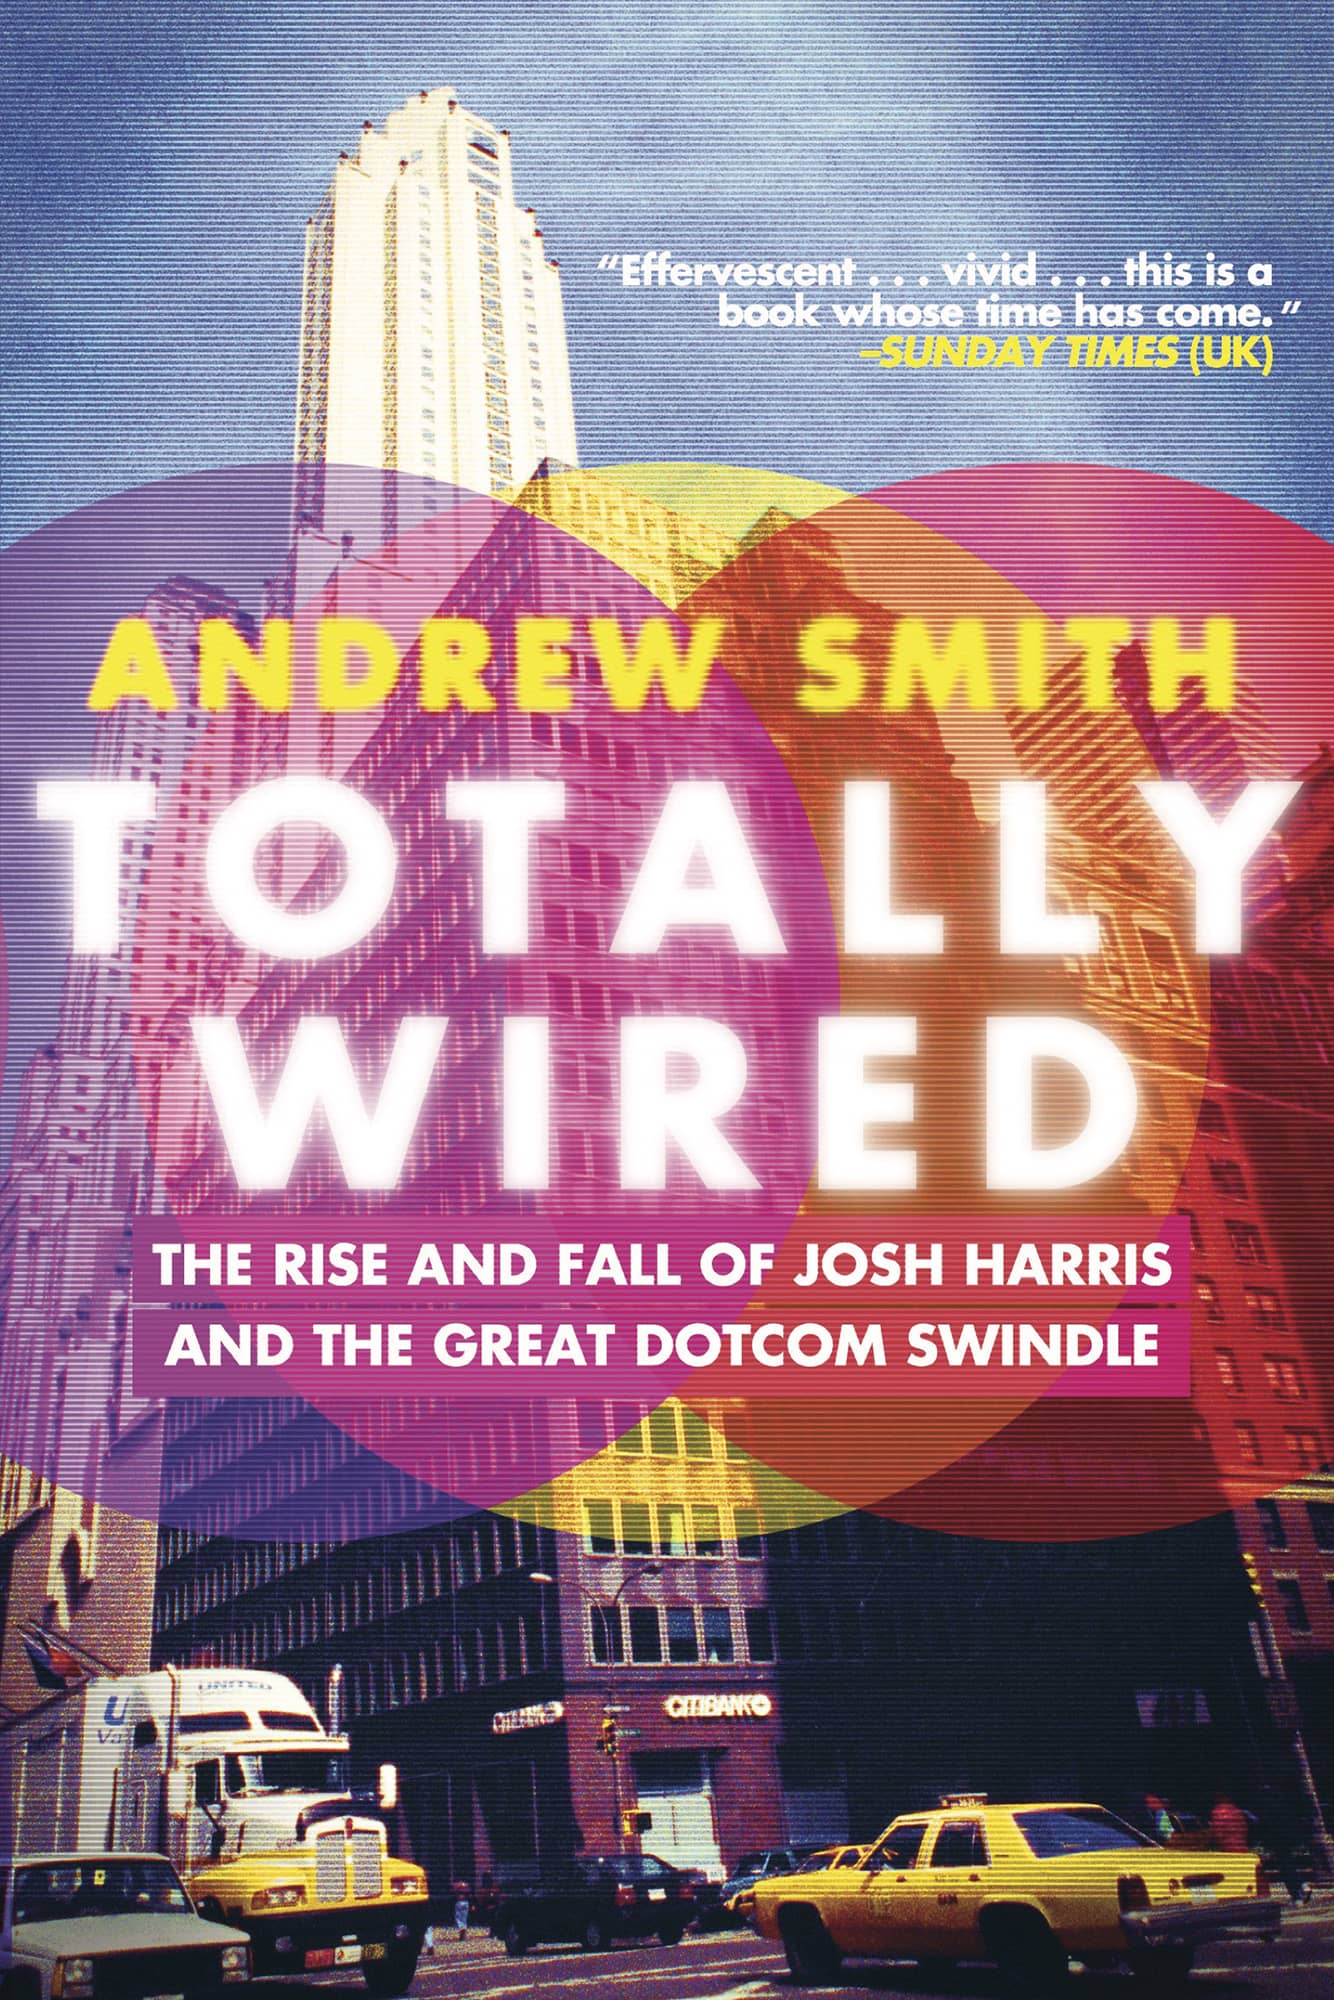 Totally Wired cover